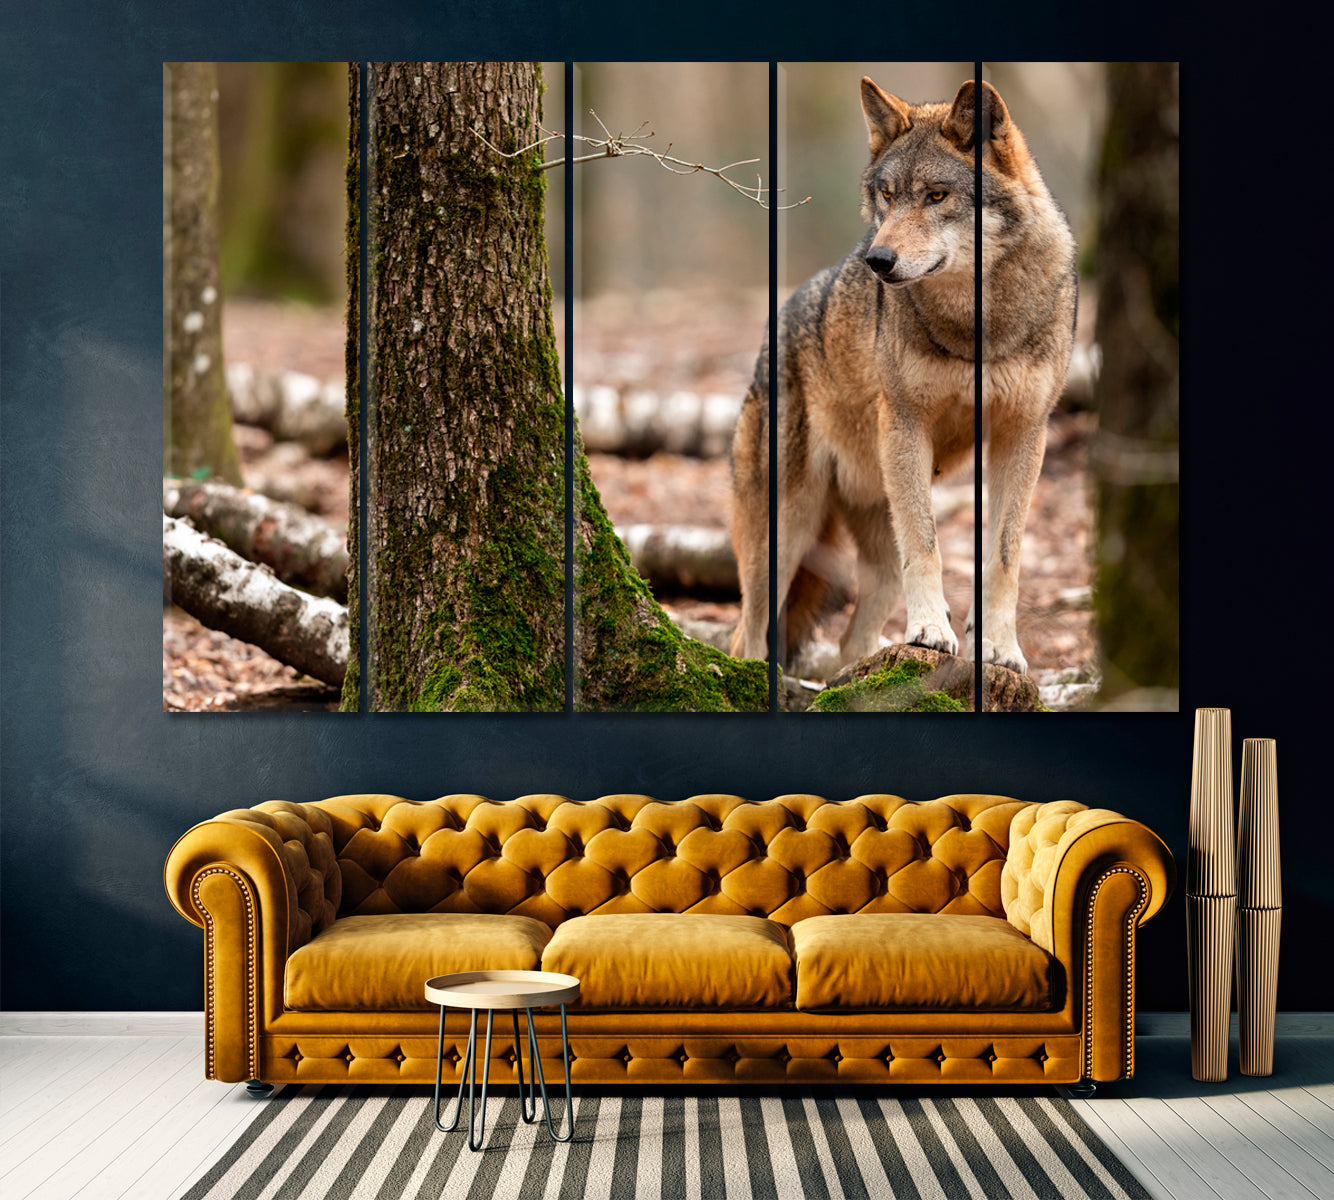 Angry Gray Wolf Canvas Print ArtLexy 5 Panels 36"x24" inches 